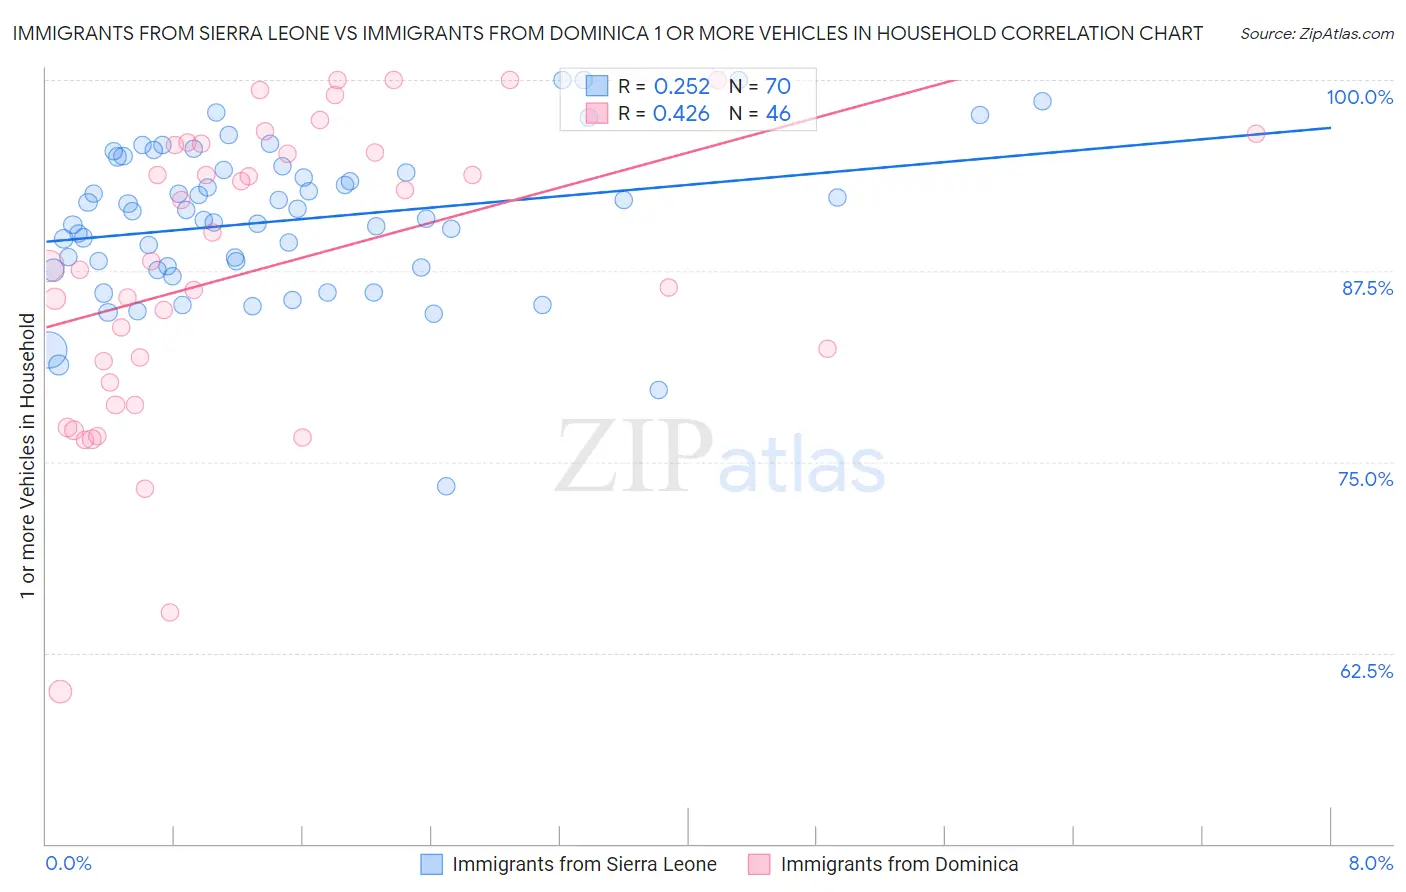 Immigrants from Sierra Leone vs Immigrants from Dominica 1 or more Vehicles in Household